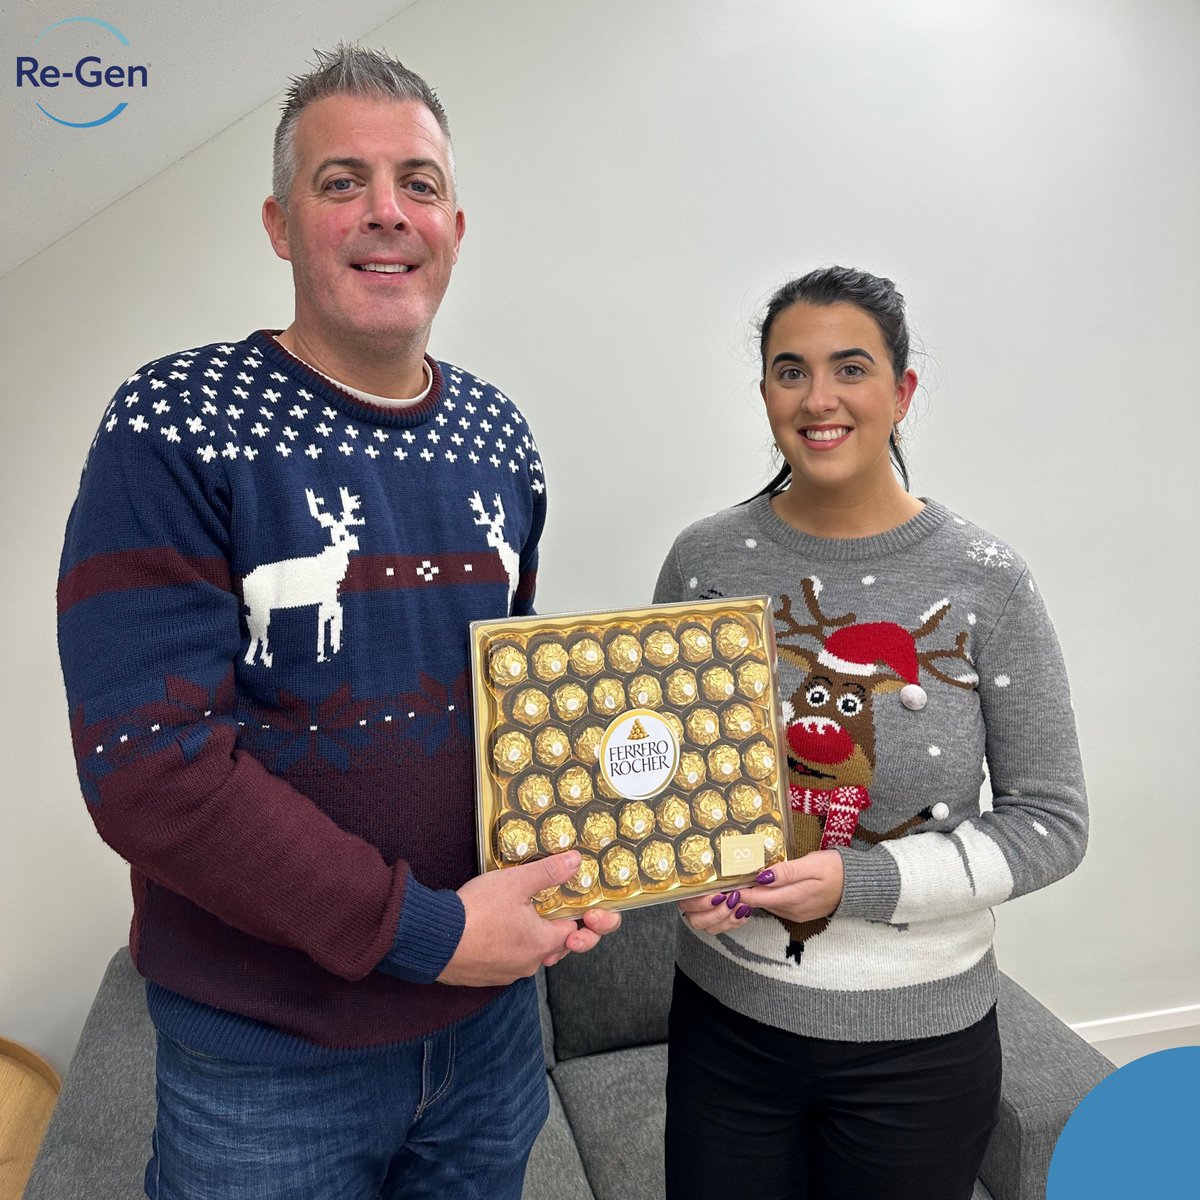 A Sweet Victory for Eadaoin! 🎄🌟

Well done, Eadaoin, for rocking the best Christmas jumper and accessories! 👏🏻

Garreth presented Eadaoin with a box of Ferrero Rocher for the stylish win!🍫🏆

#recycling #regenwaste #ourfutureiscleaner #christmasjumper